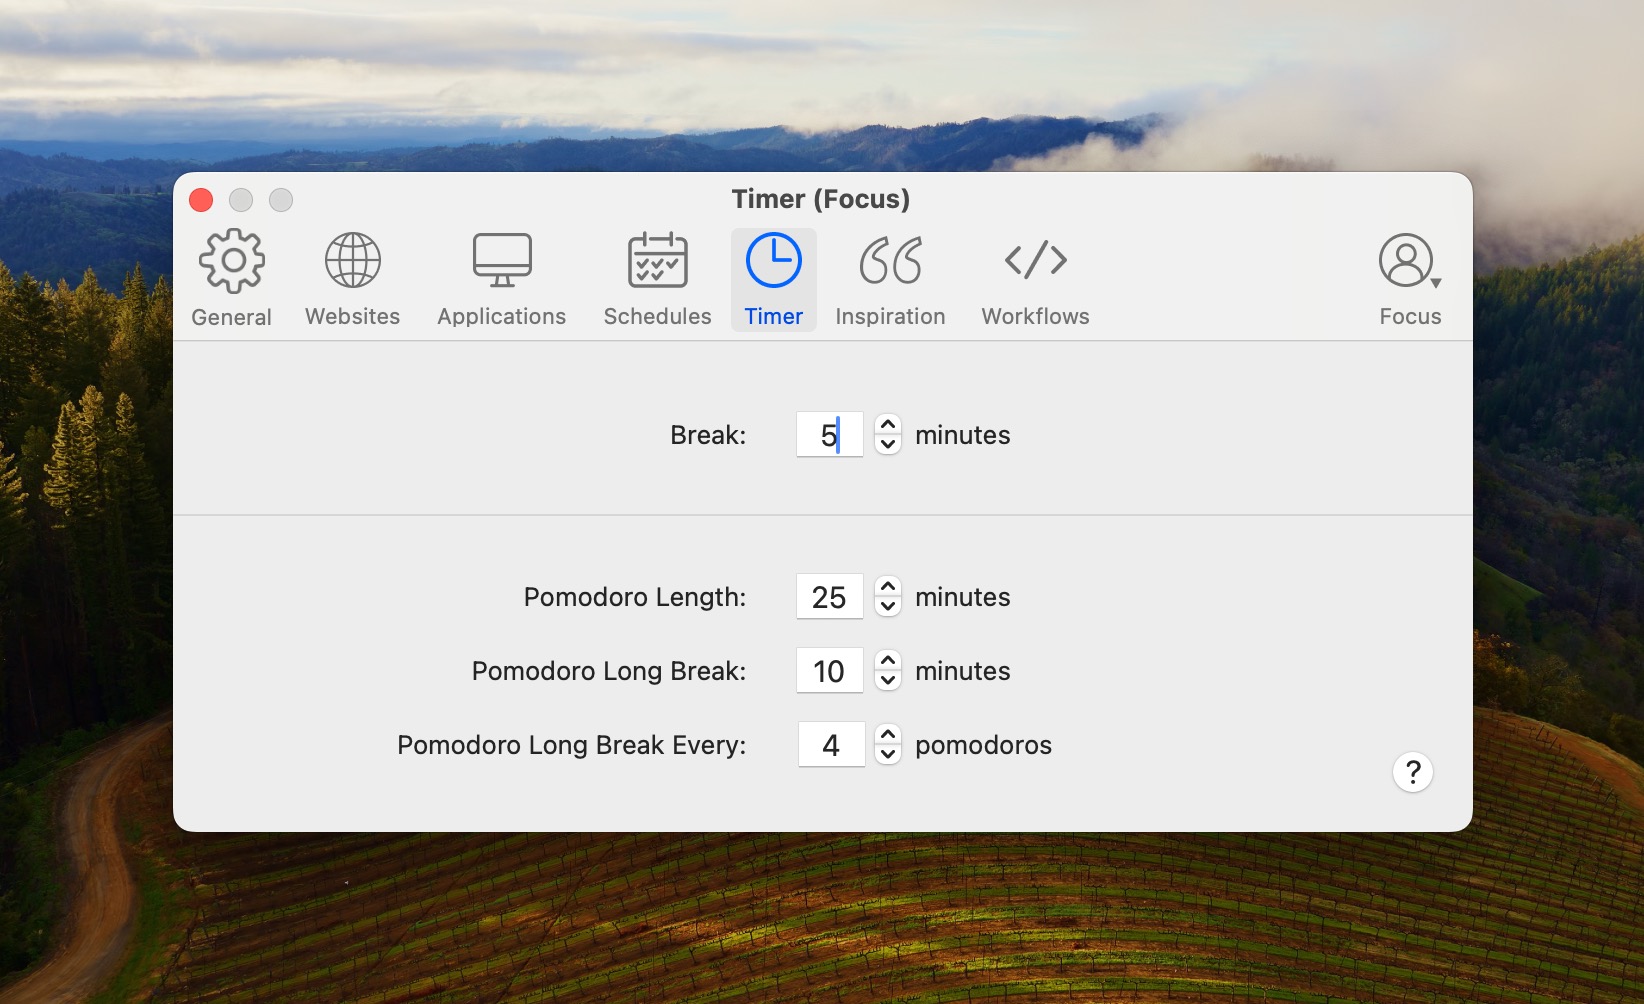 Focus allows you to tweak the default Pomodoro settings, including the length of work sessions, short breaks, long breaks, and the frequency of long breaks.